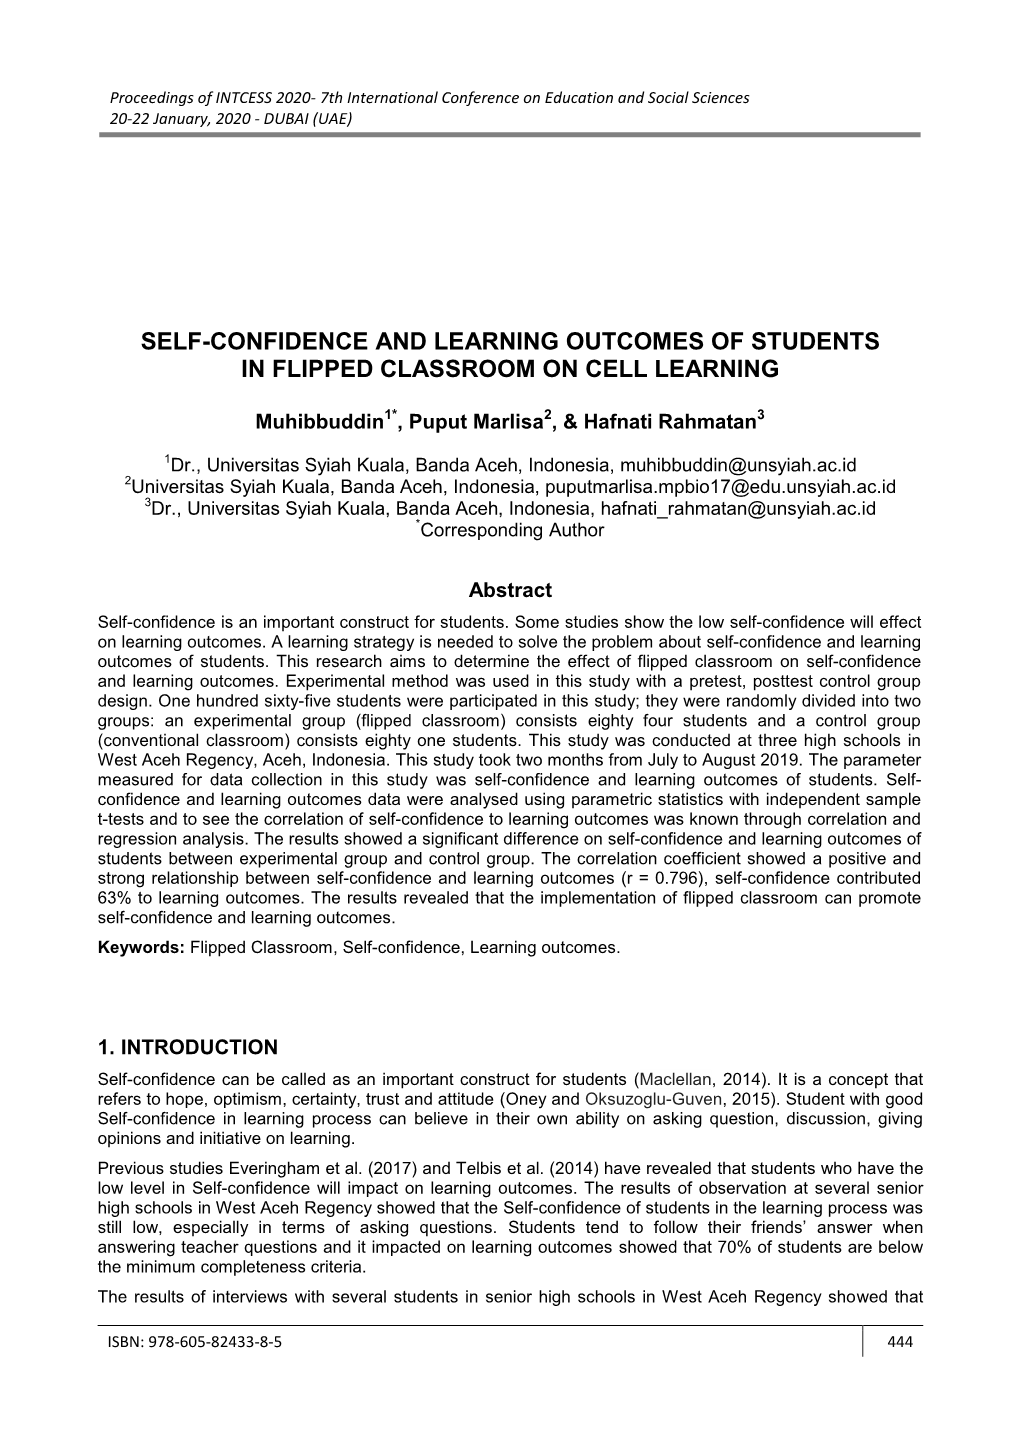 Self-Confidence and Learning Outcomes of Students in Flipped Classroom on Cell Learning